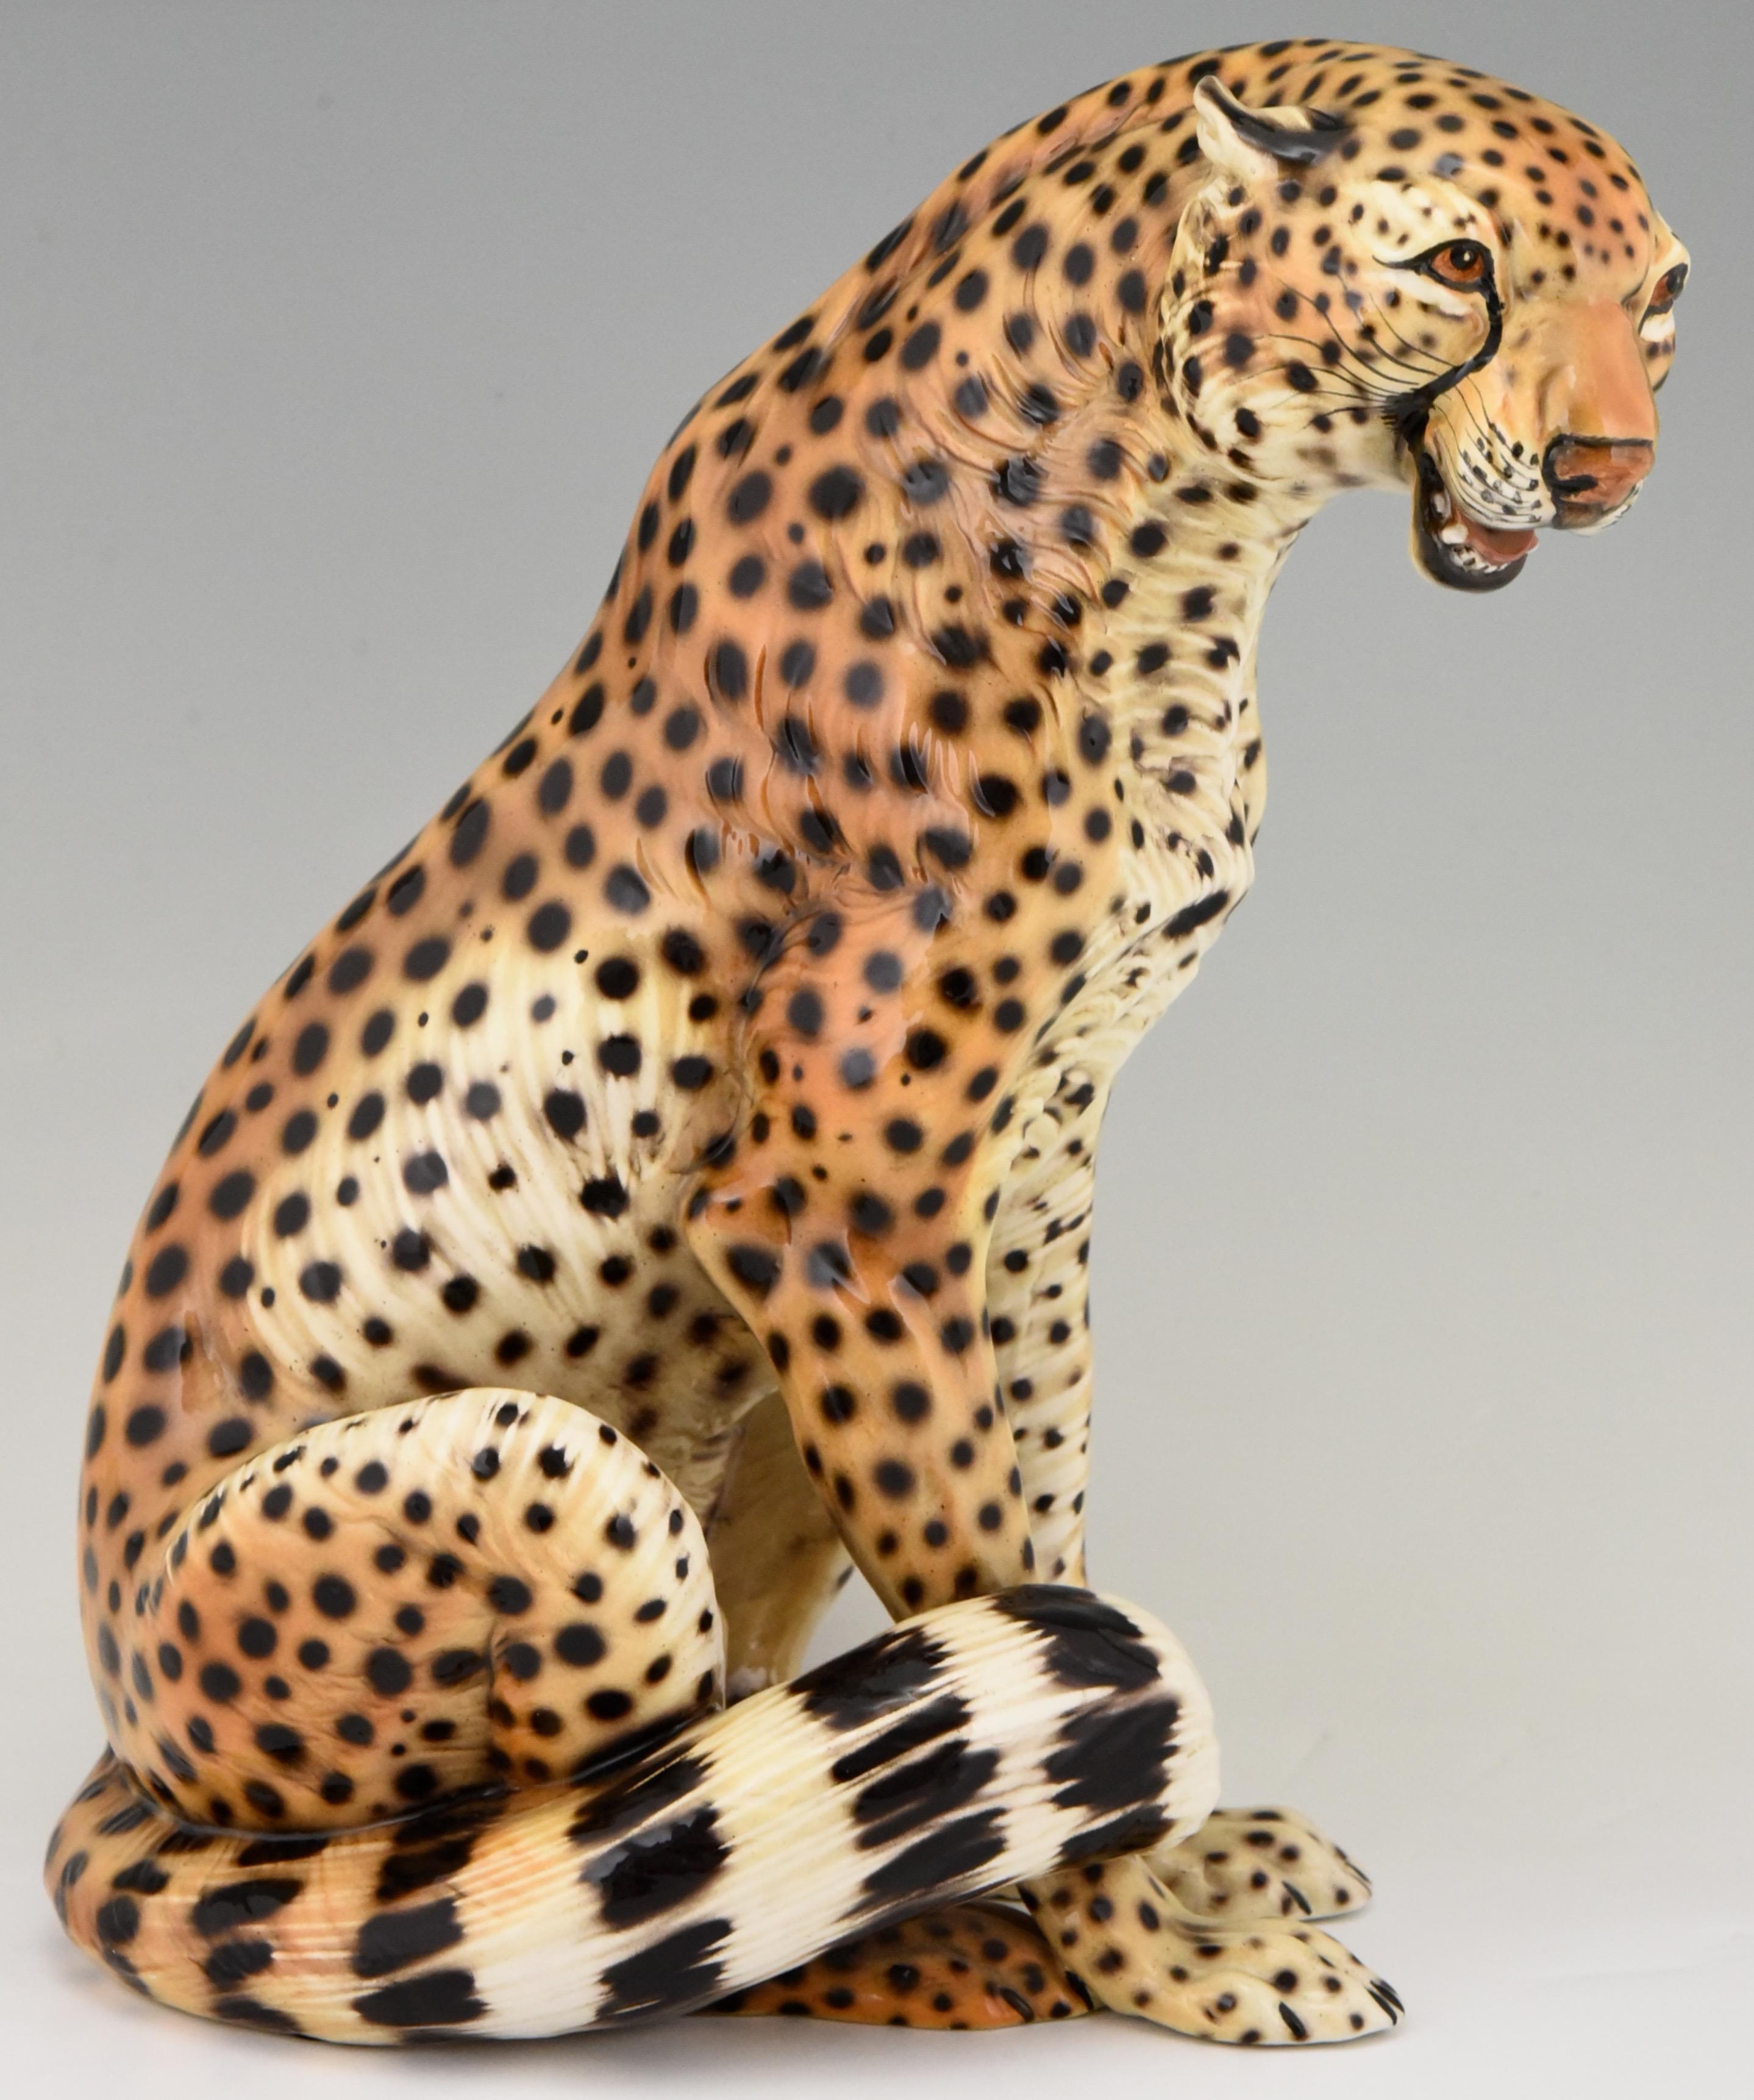 A beautiful and tall hand painted ceramic sculpture of a cheetah, leopard by Giovanni Ronzan Torino, Italy, 1960s
Signed and numbered.

Giovanni Ronzan and his brothers founded the Ronzan factory in 1940 after he has left his job as chief painter